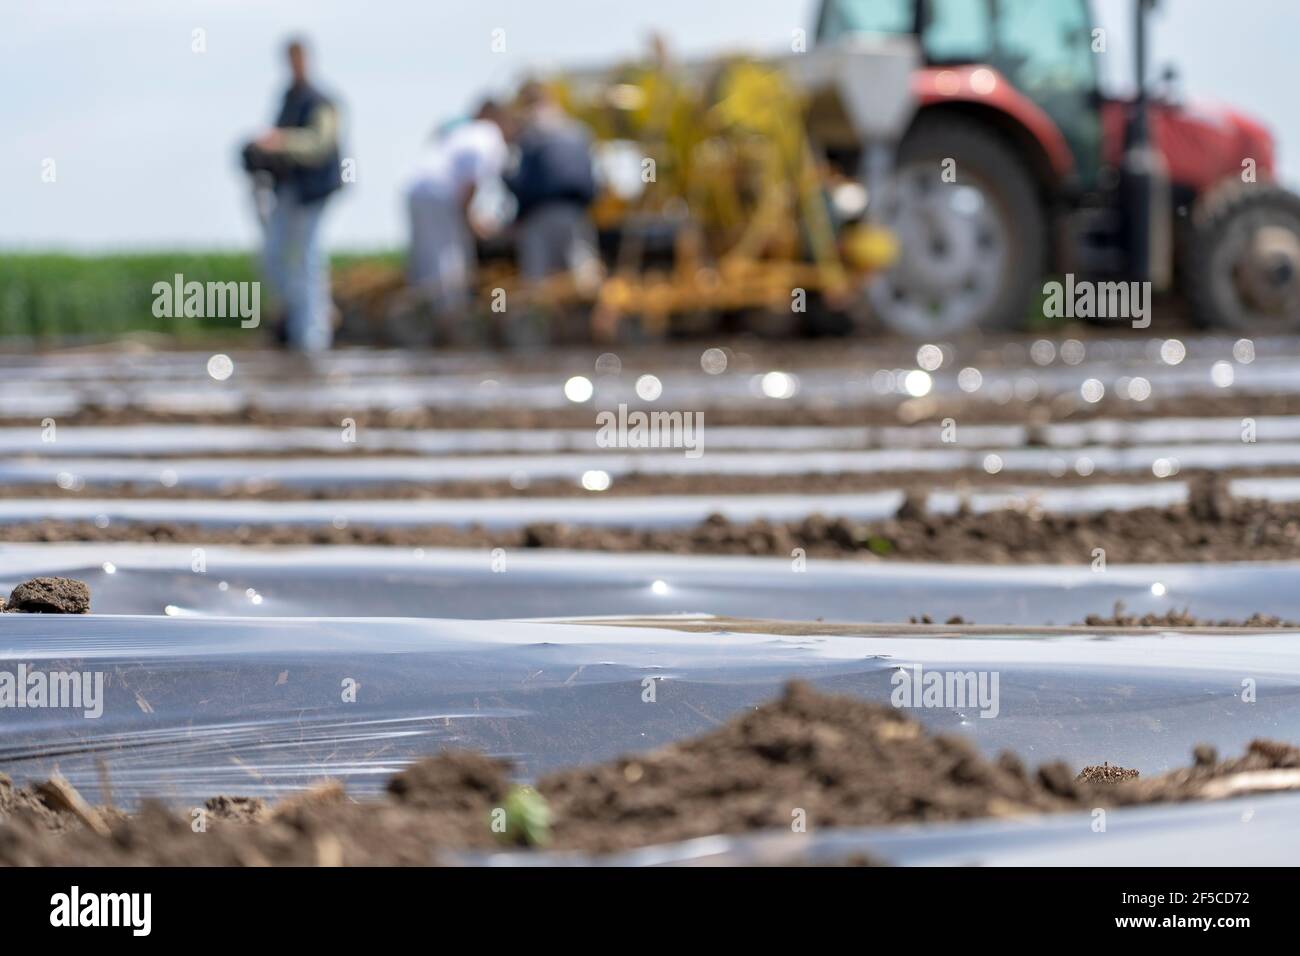 Tractor using mulch applicator on farmland. Plastic mulch suppress weeds, conserve water, and boost crop production. Vegetable Growing. Stock Photo